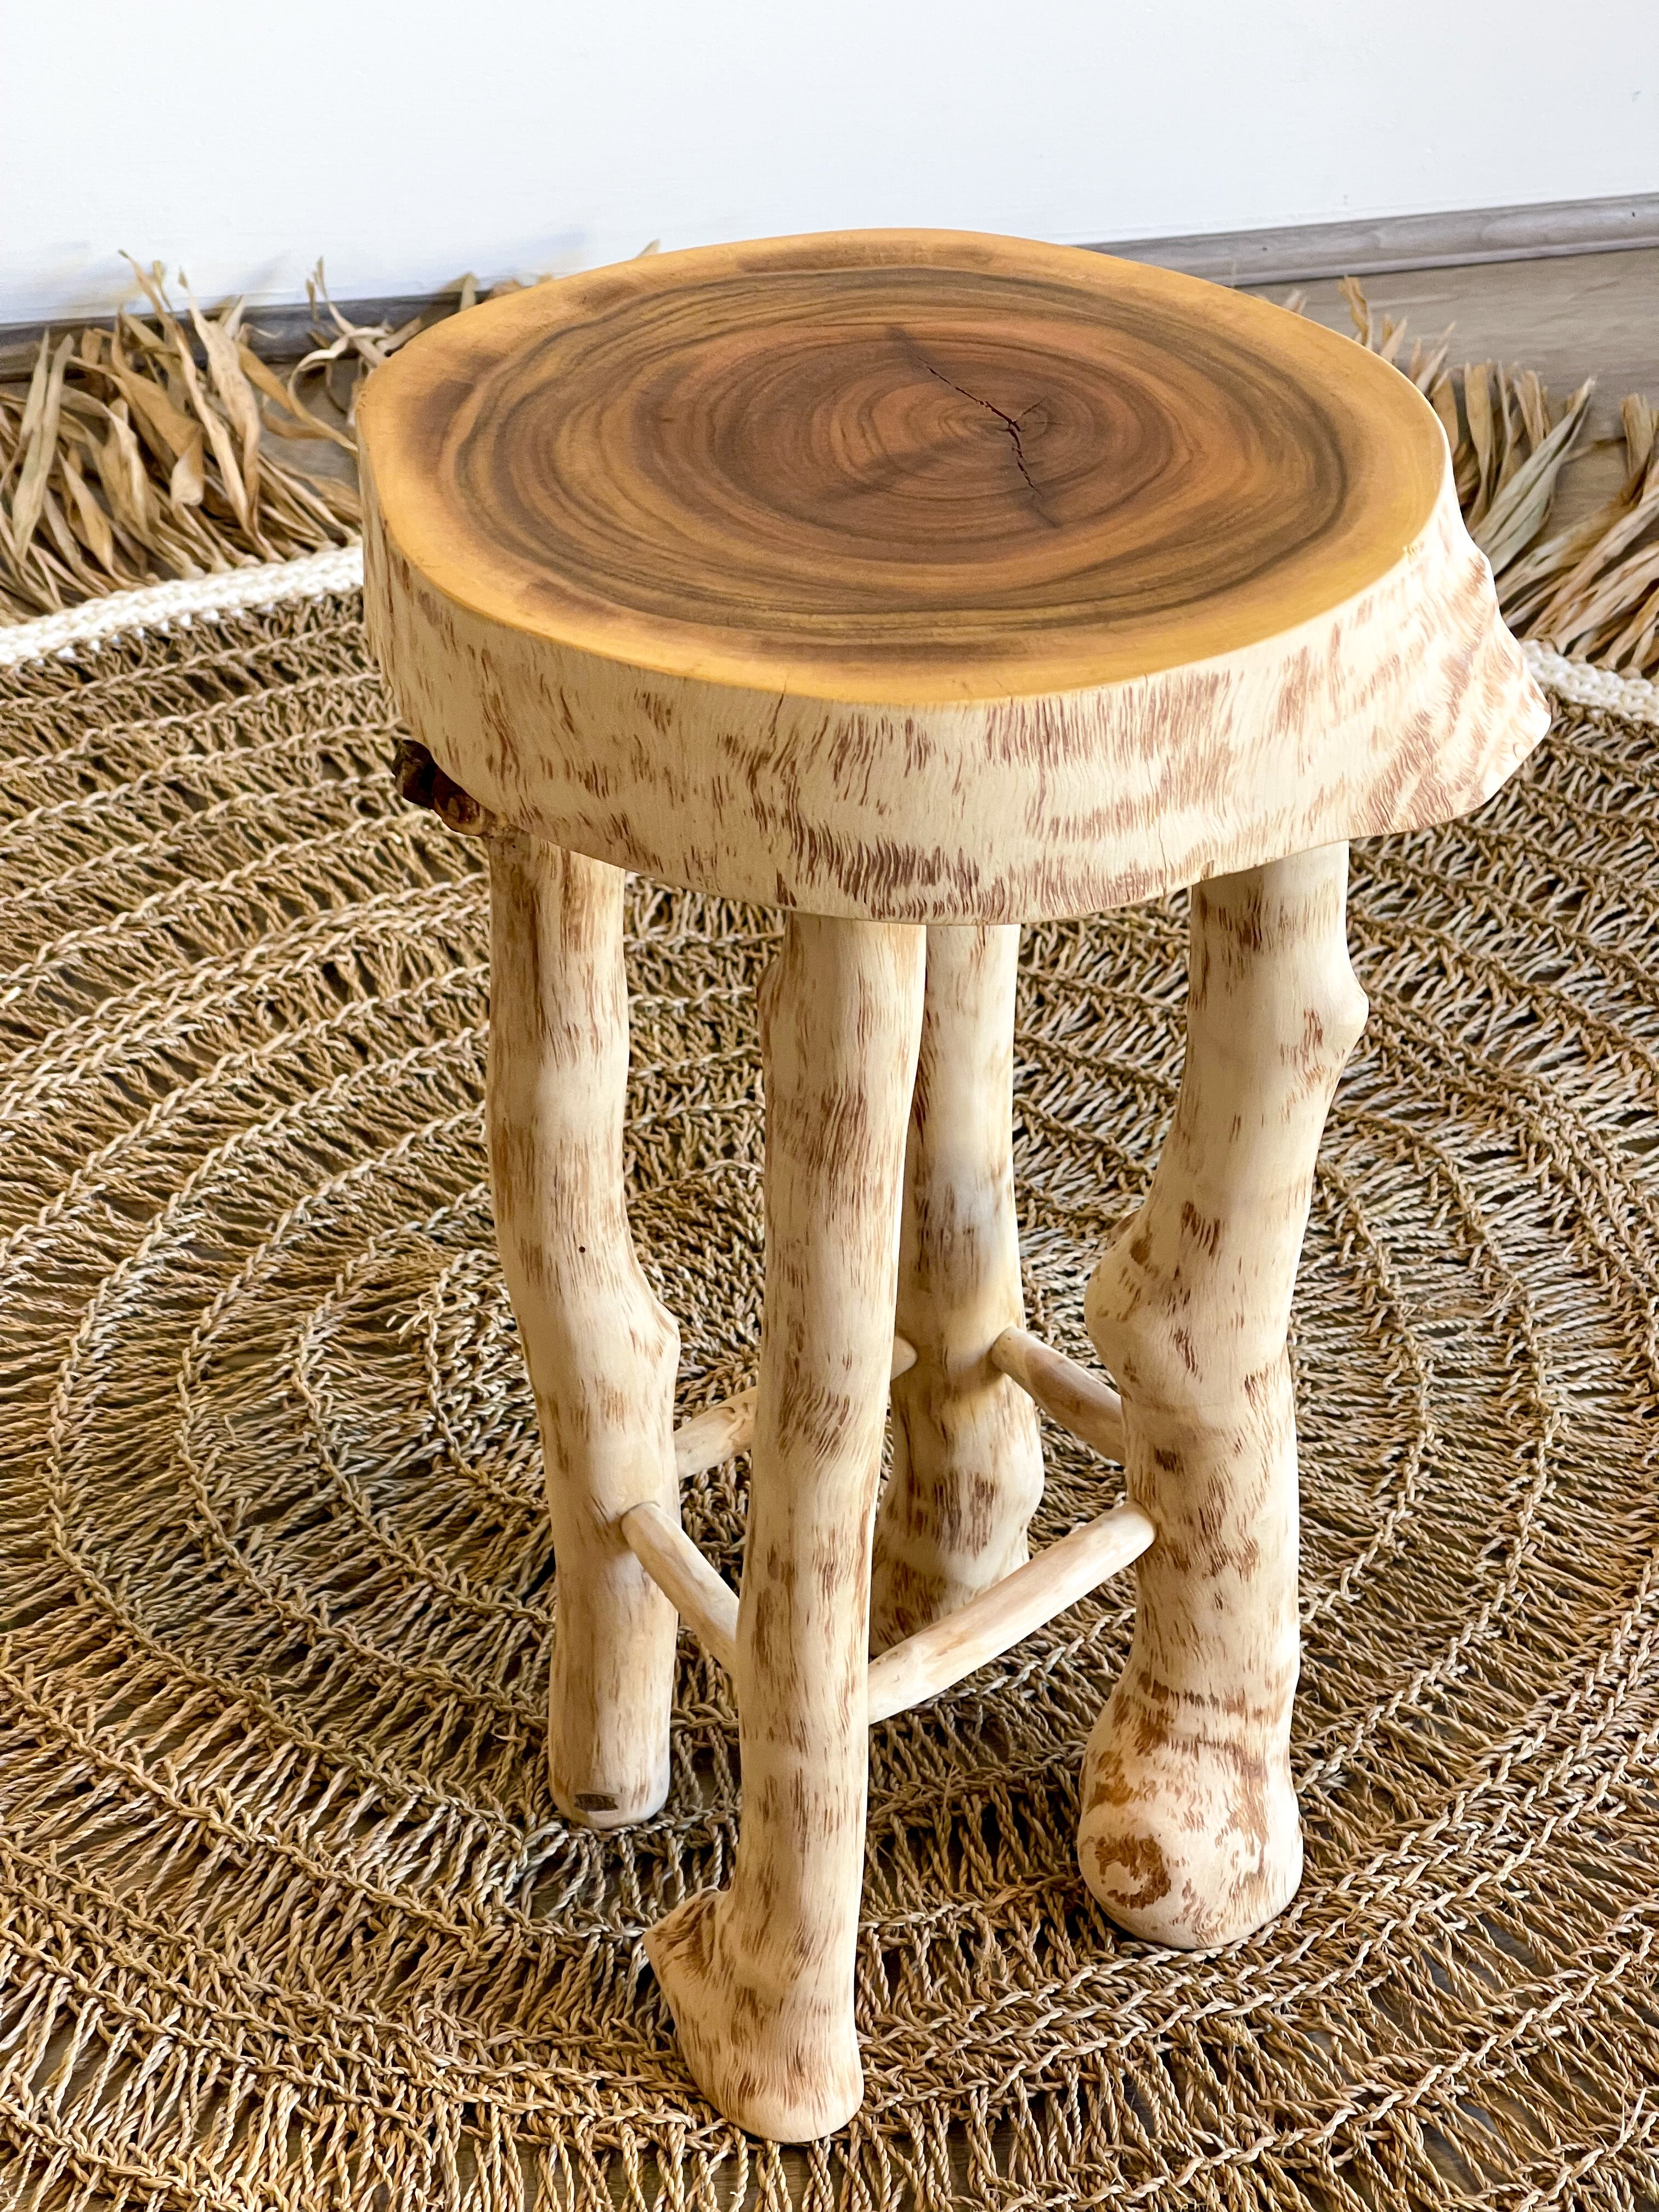 ORION - Stool and SideTable